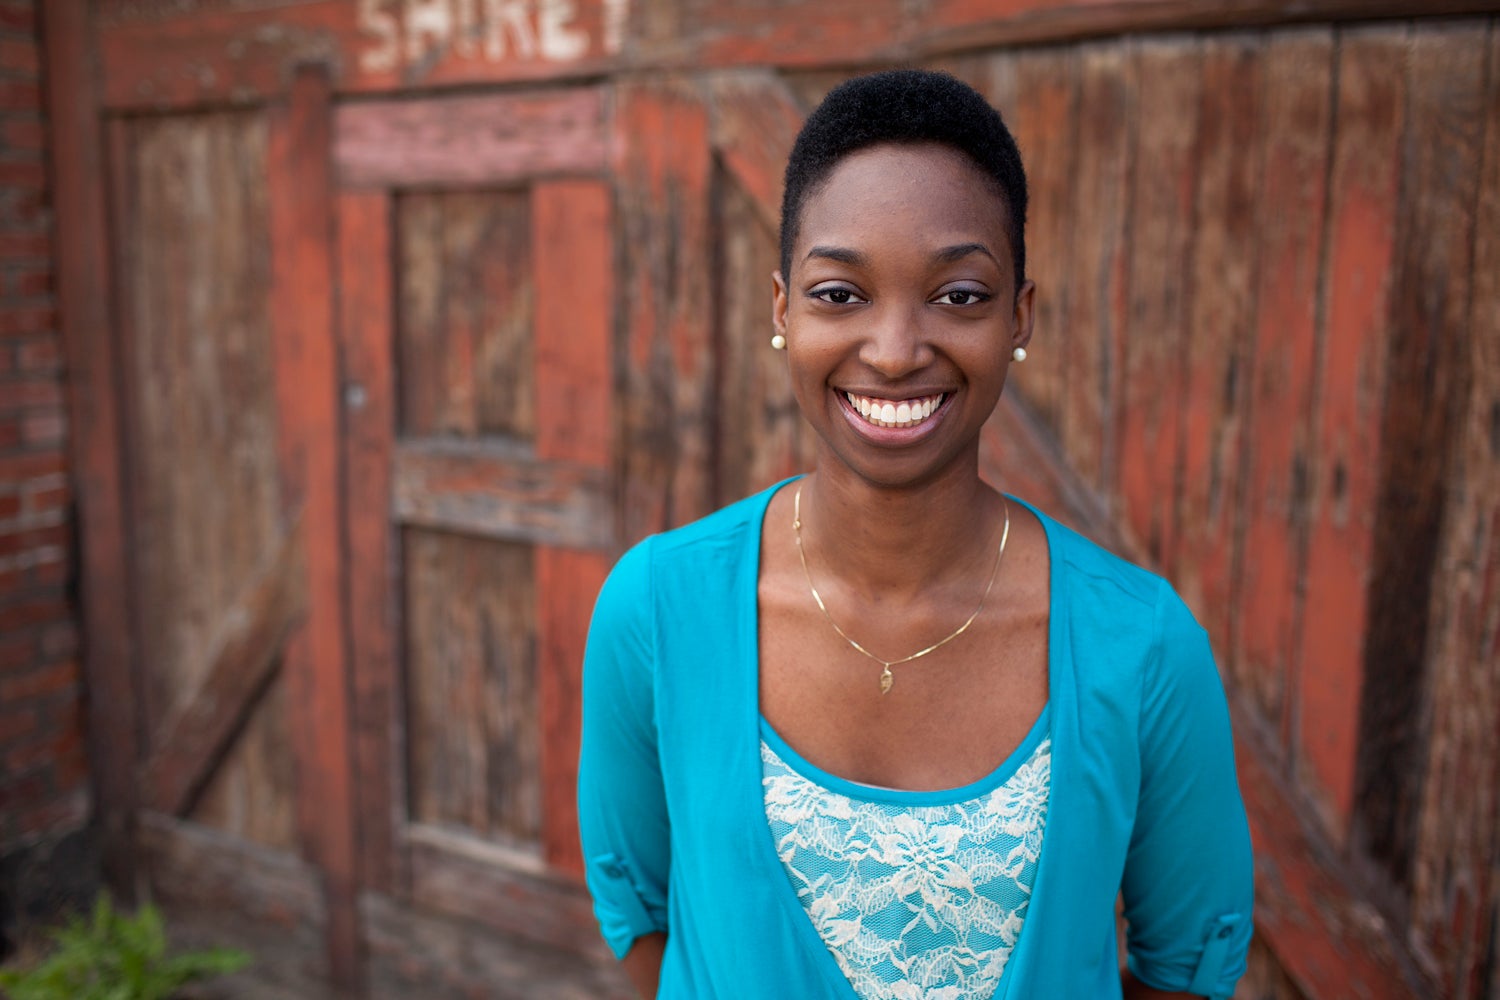 The image depicts a smiling brown-skinned woman with short dark hair wearing a teal and cream blouse who is standing in front of a red, distressed wood backdrop.